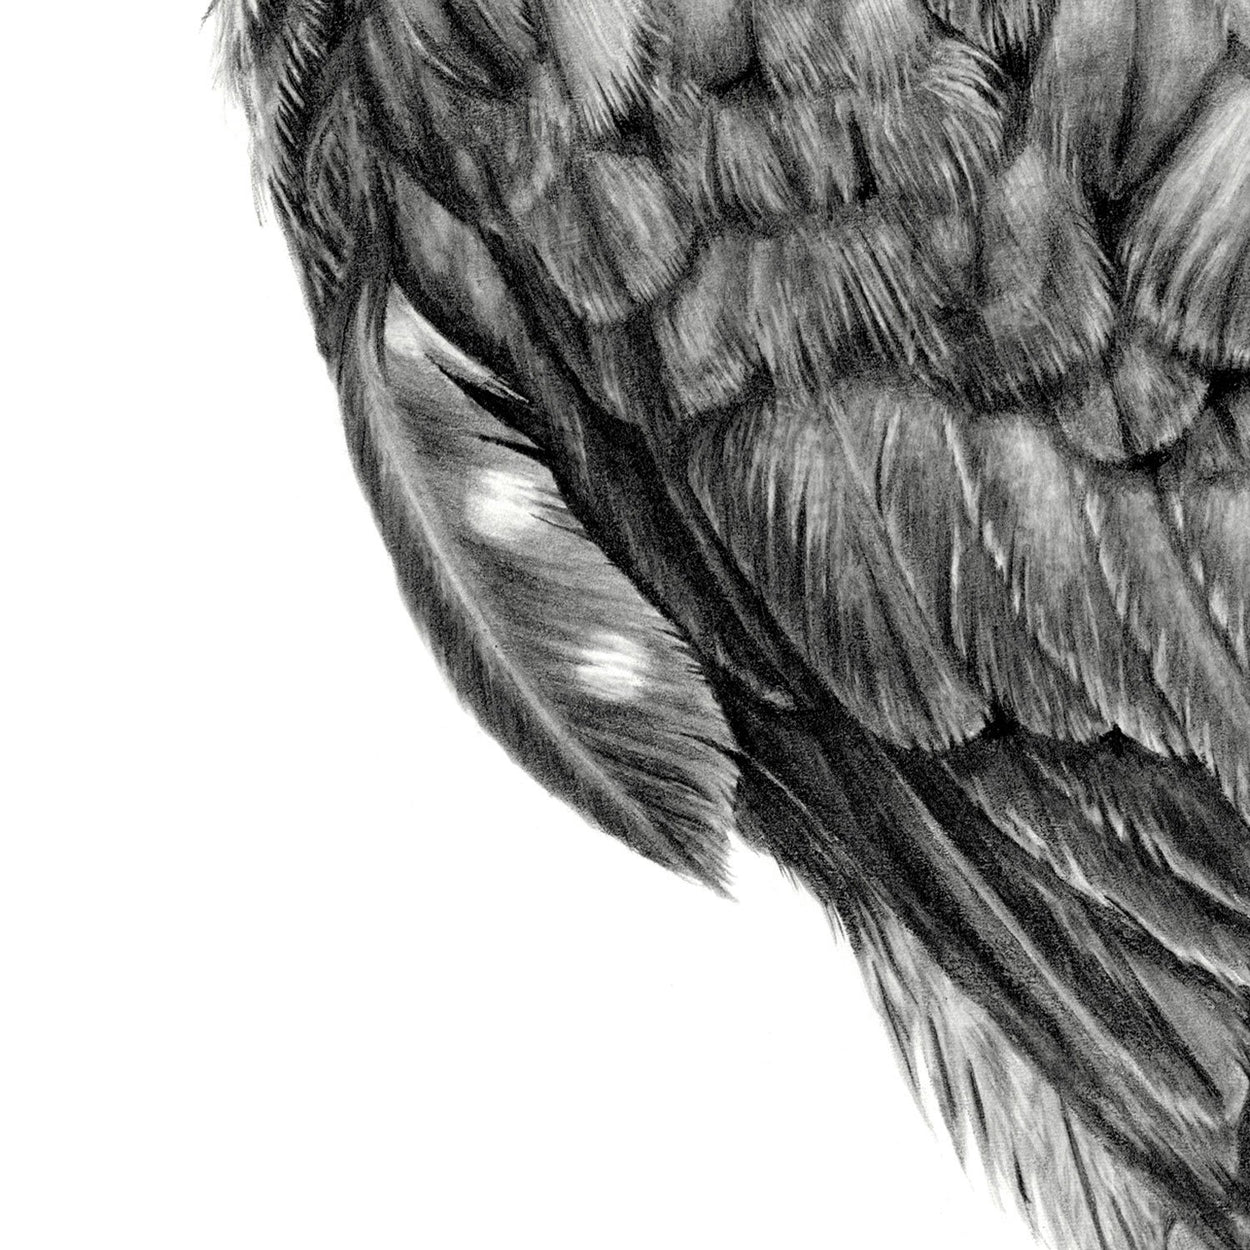 Merlin Feathers Drawing Close-up 2 - The Thriving Wild